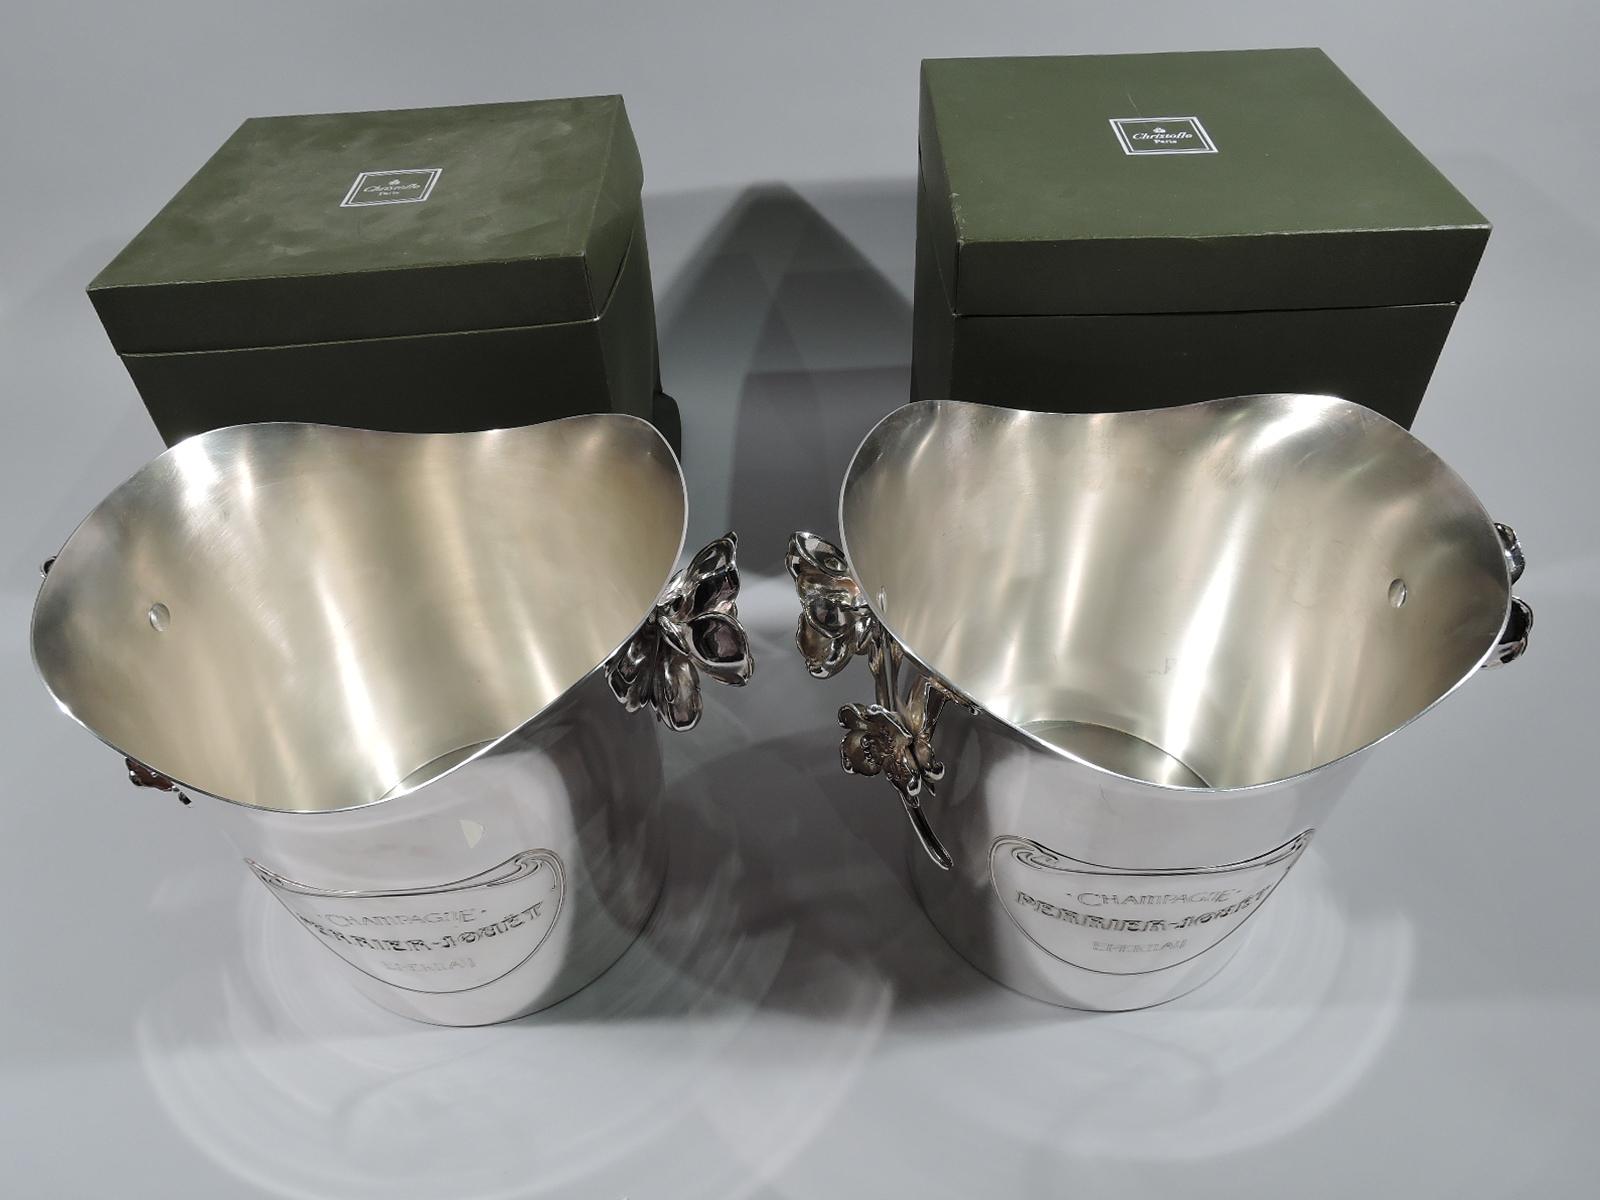 Pair of Christofle French Art Nouveau Champagne Buckets in Boxes 4